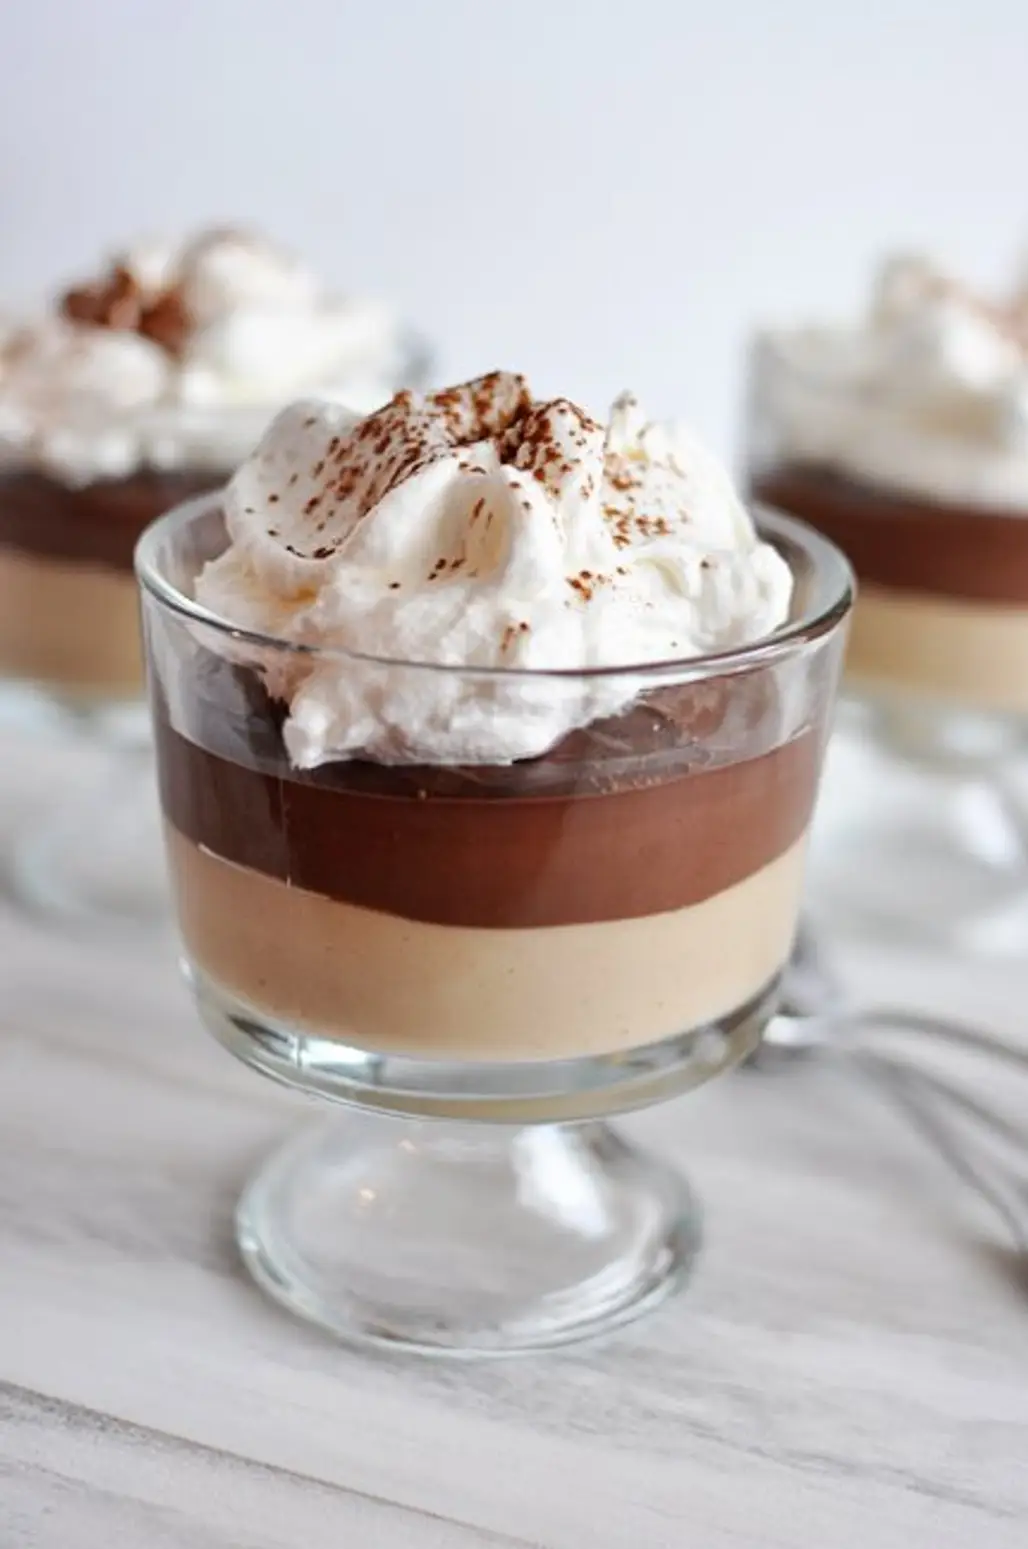 Layered Peanut Butter and Chocolate Pudding